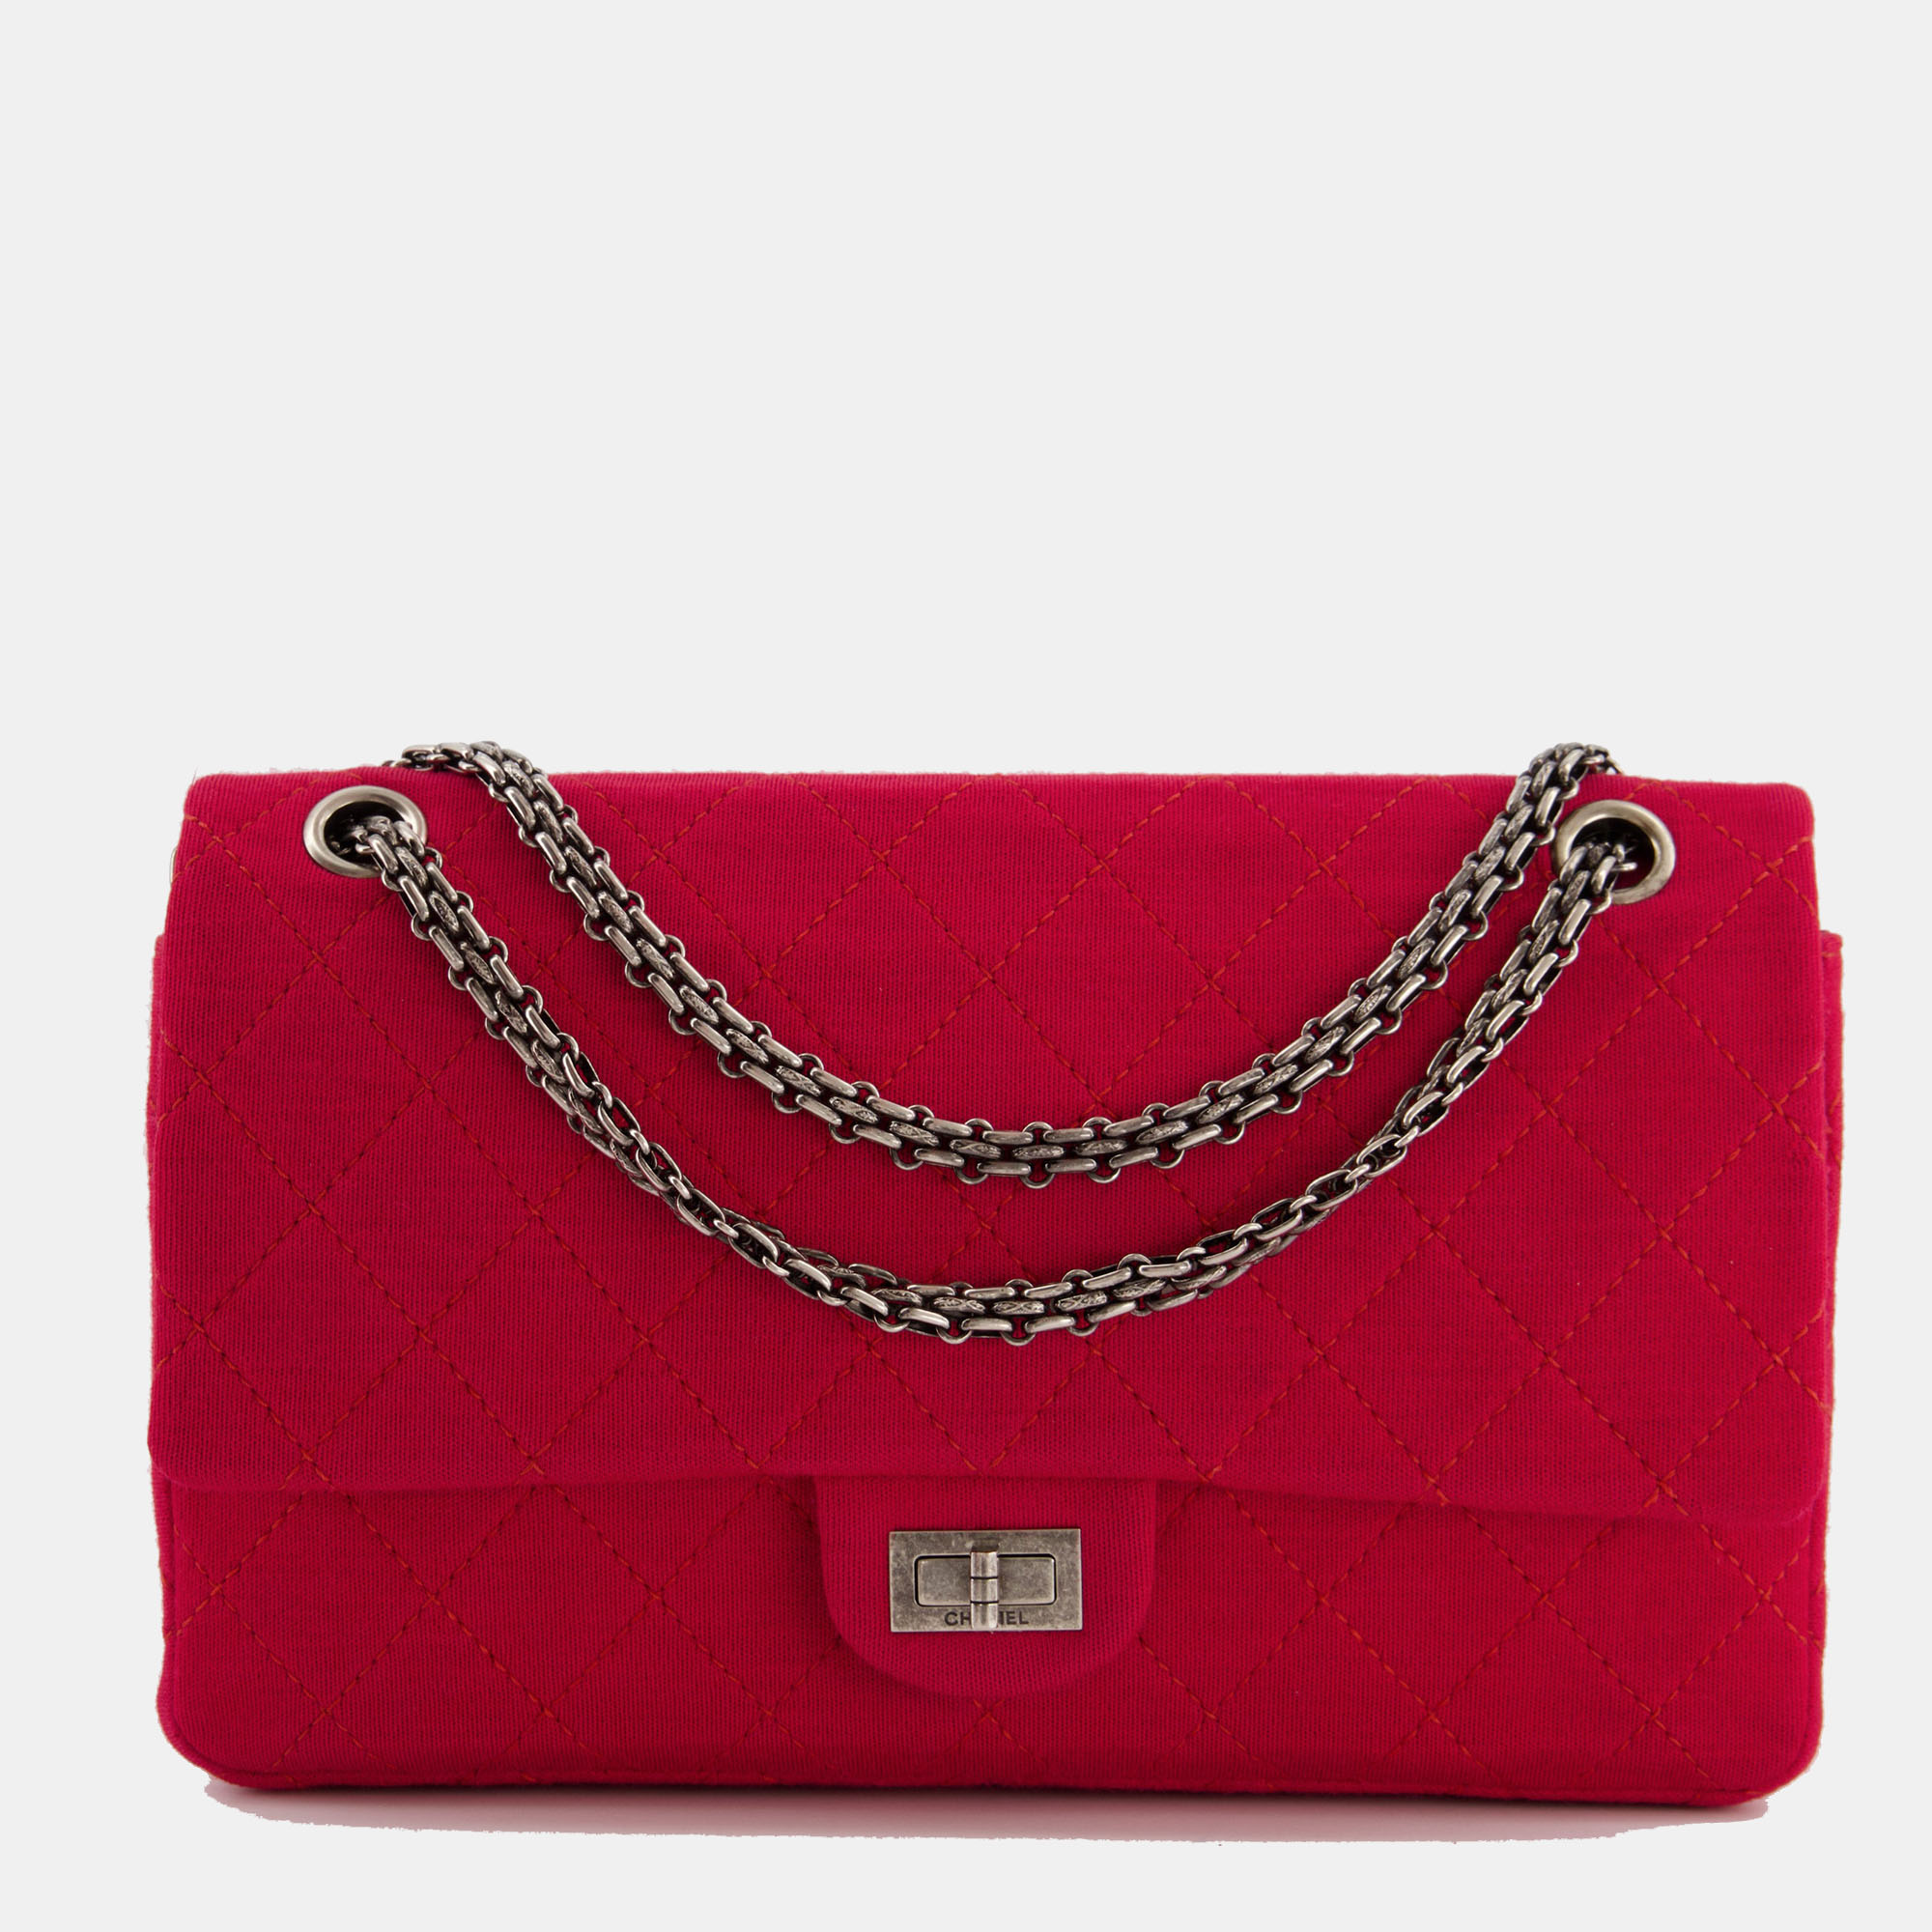 Chanel red medium reissue 2.55 double flap bag in quilted fabric with ruthenium hardware rrp - &acirc;&pound;8,530